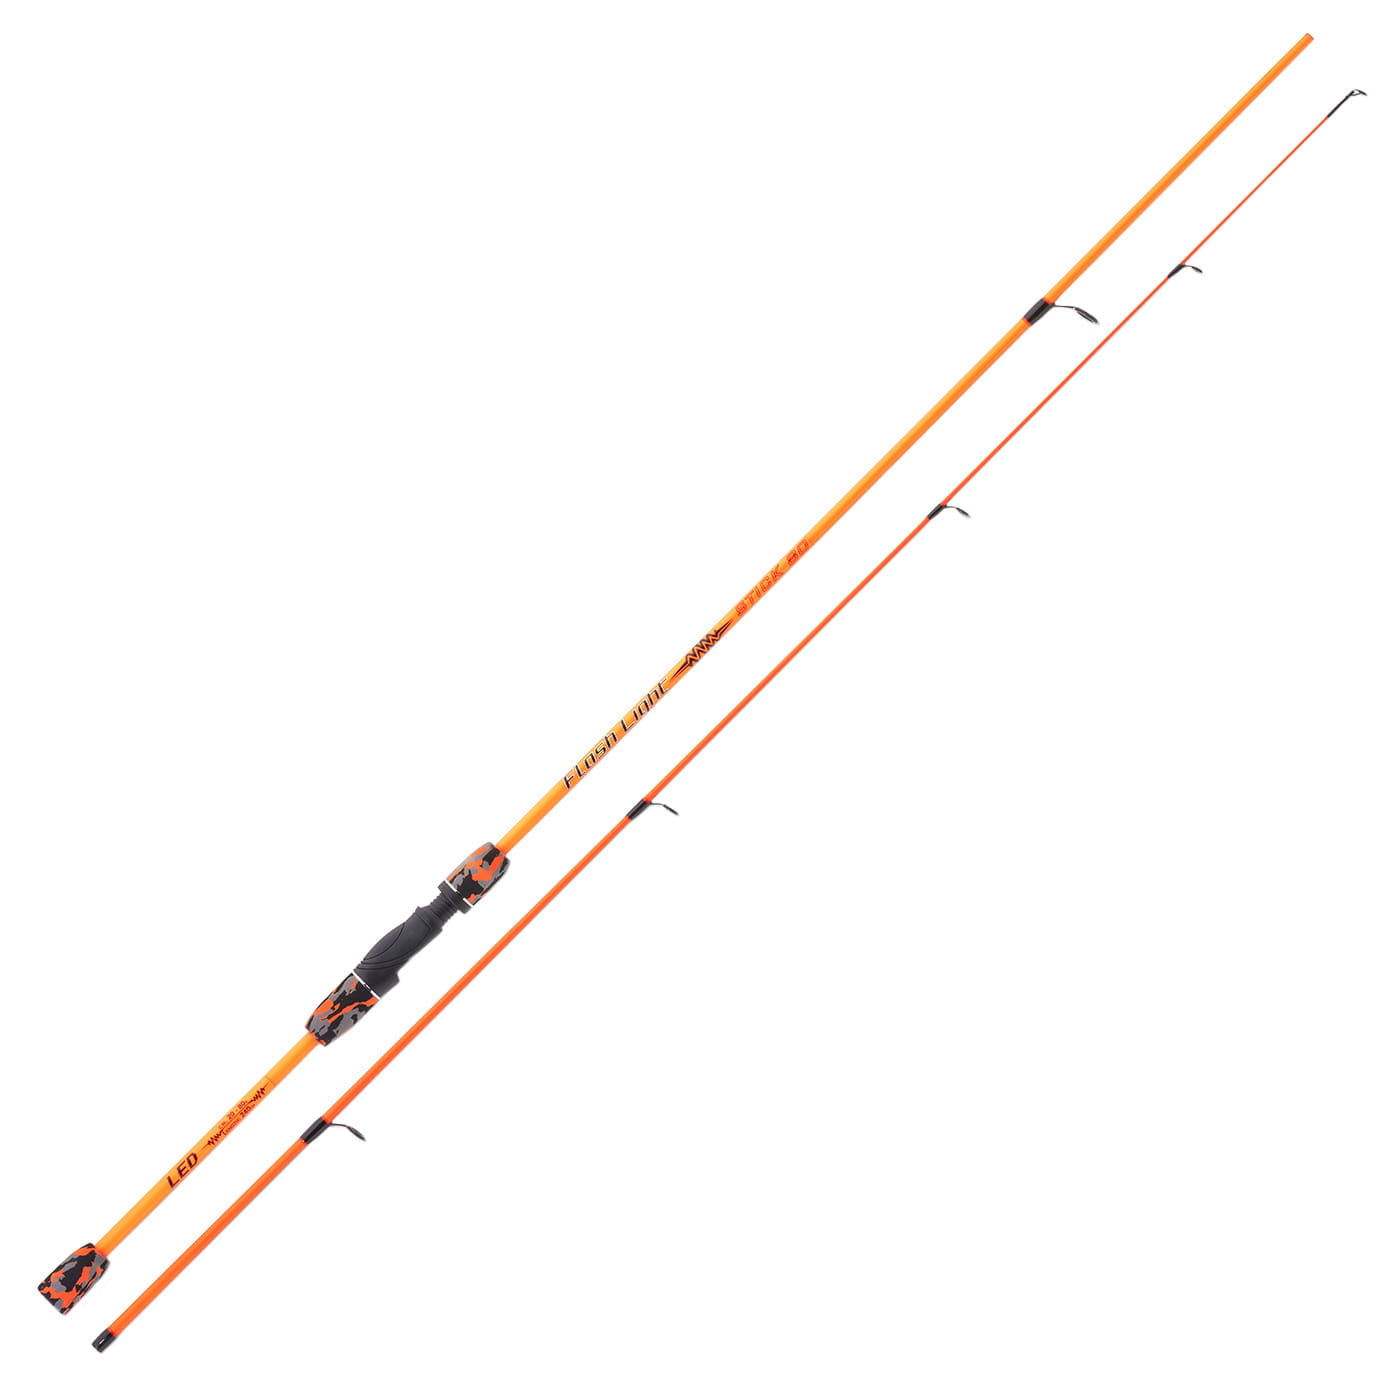 Fish Rig 180 Super Light Tele Rod 180cm 5' 11 & 160cm 5' 4 2 tips –  Rigged and Ready